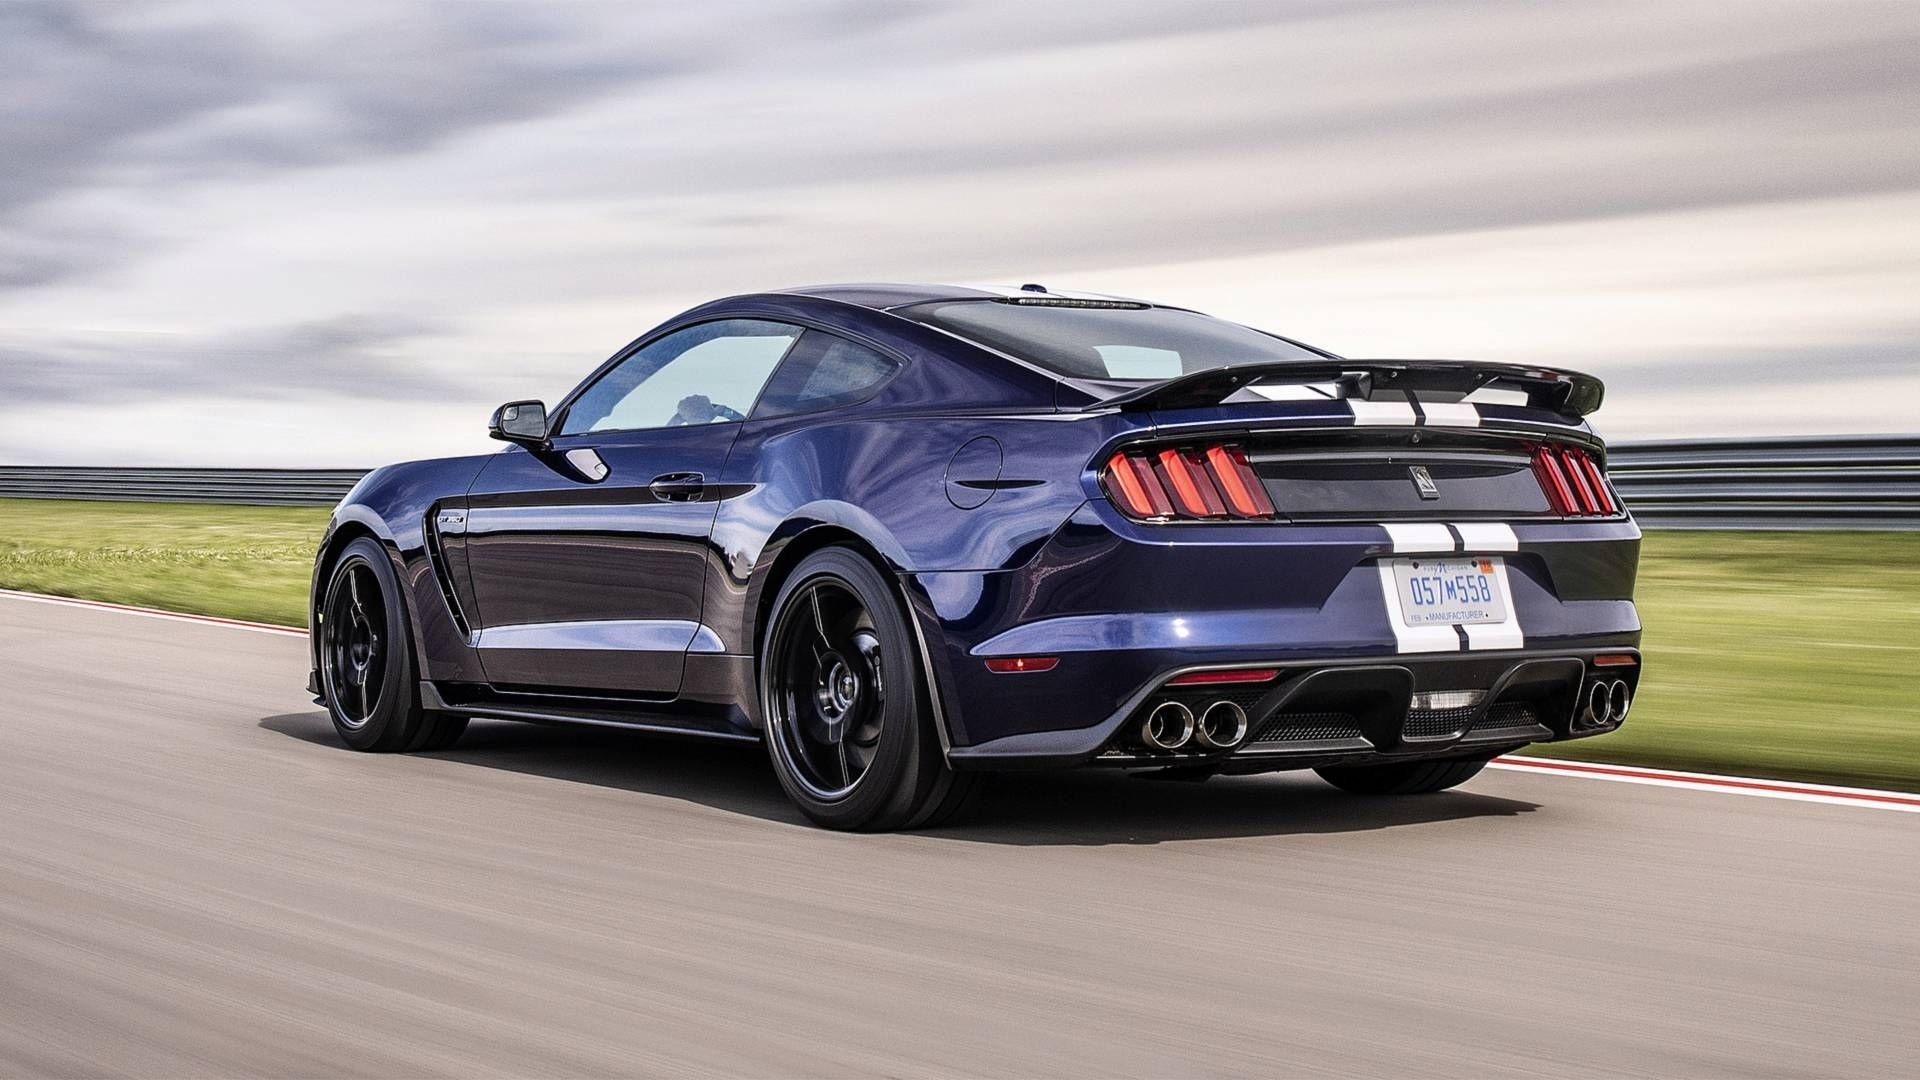 1920x1080 The 2019 Ford Mustang Shelby Gt350R Announced Specs and Review